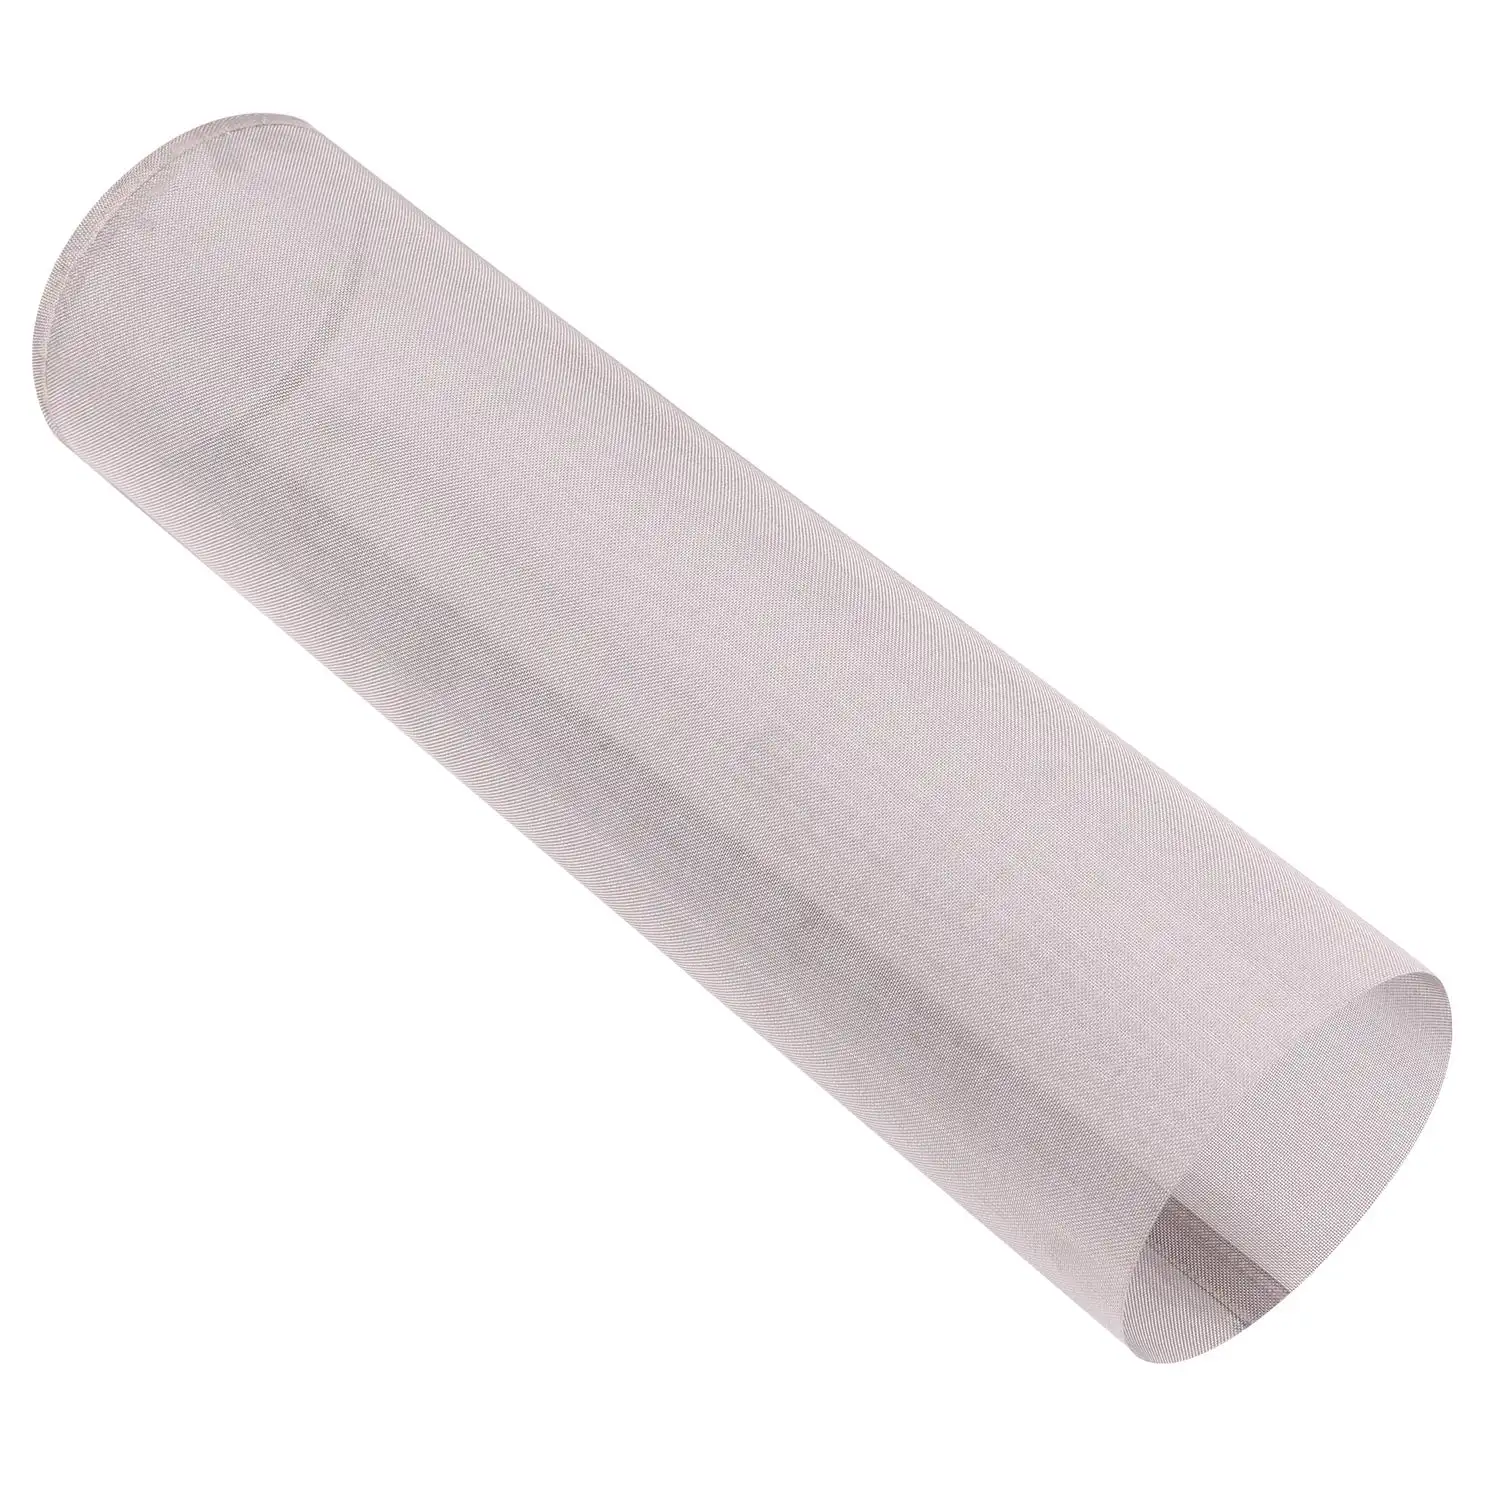 1 inch 20 Mesh Stainless Steel Wire Mesh Water Strainer Filter